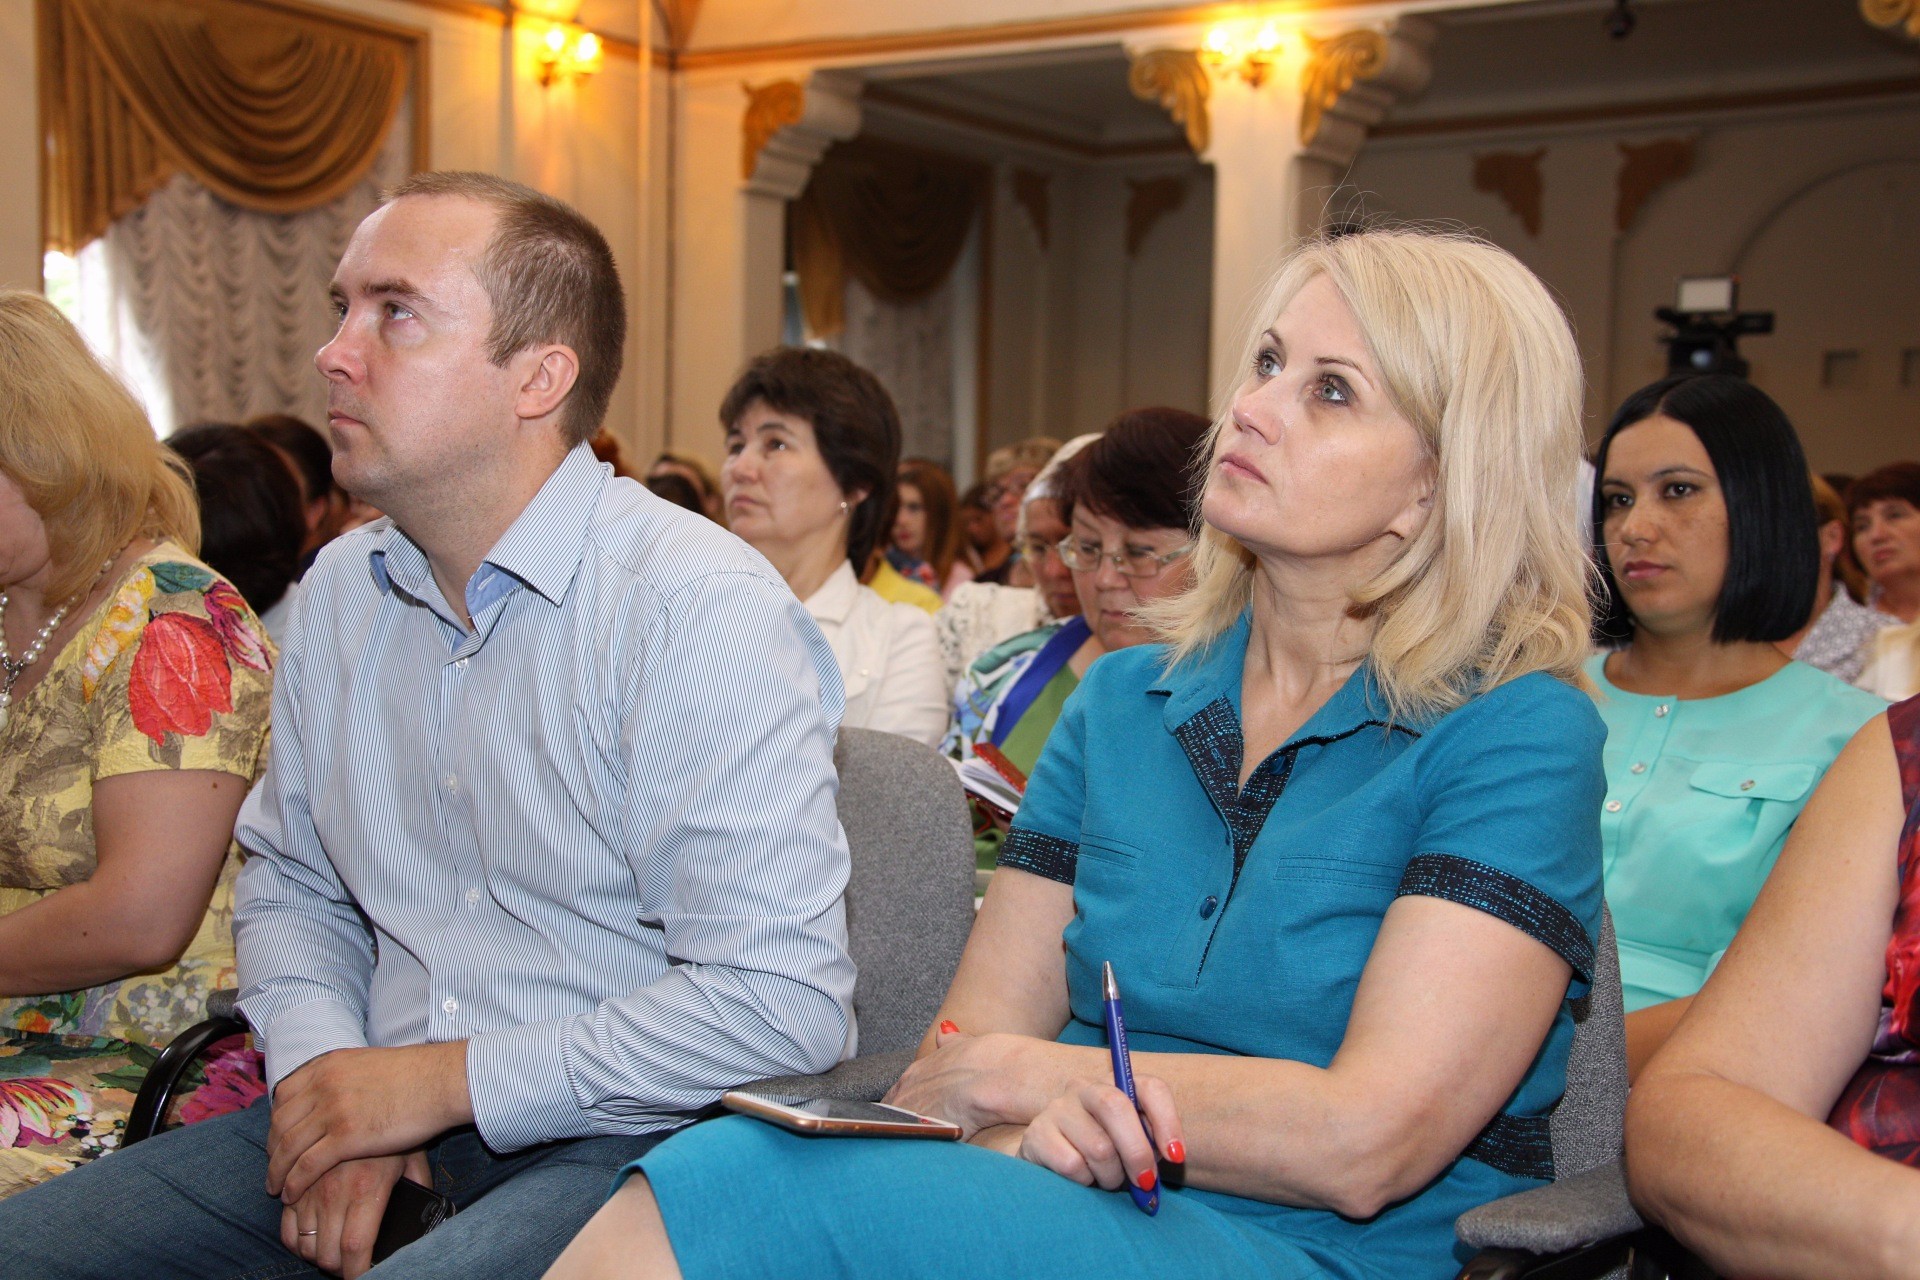 A plenary session of the I Congress of Teachers of History and Social Studies of the Republic of Tatarstan was held in Elabuga Institute of KFU